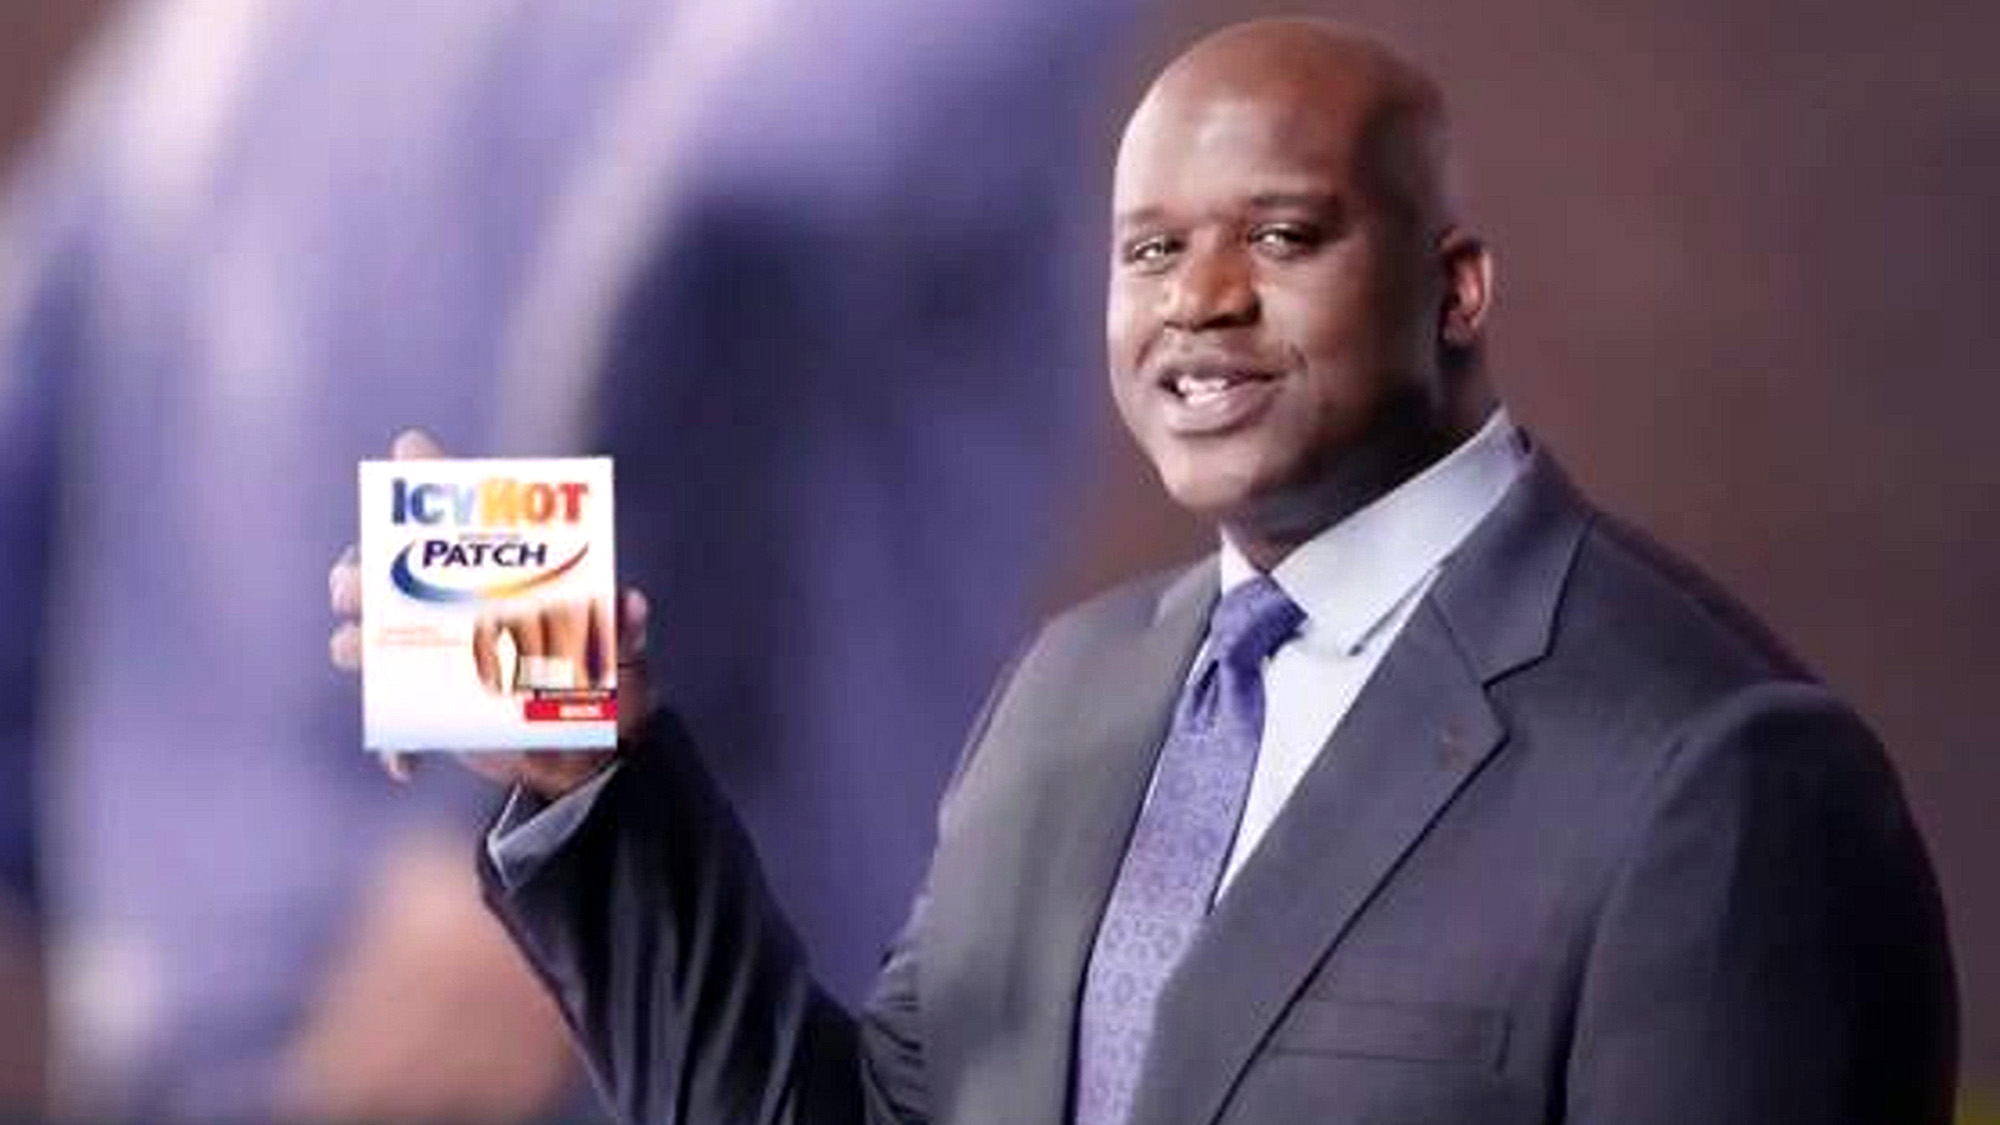 4 Icy Hot Commercials Where It Was Extremely Clear Shaq Thought Icy Hot Was...